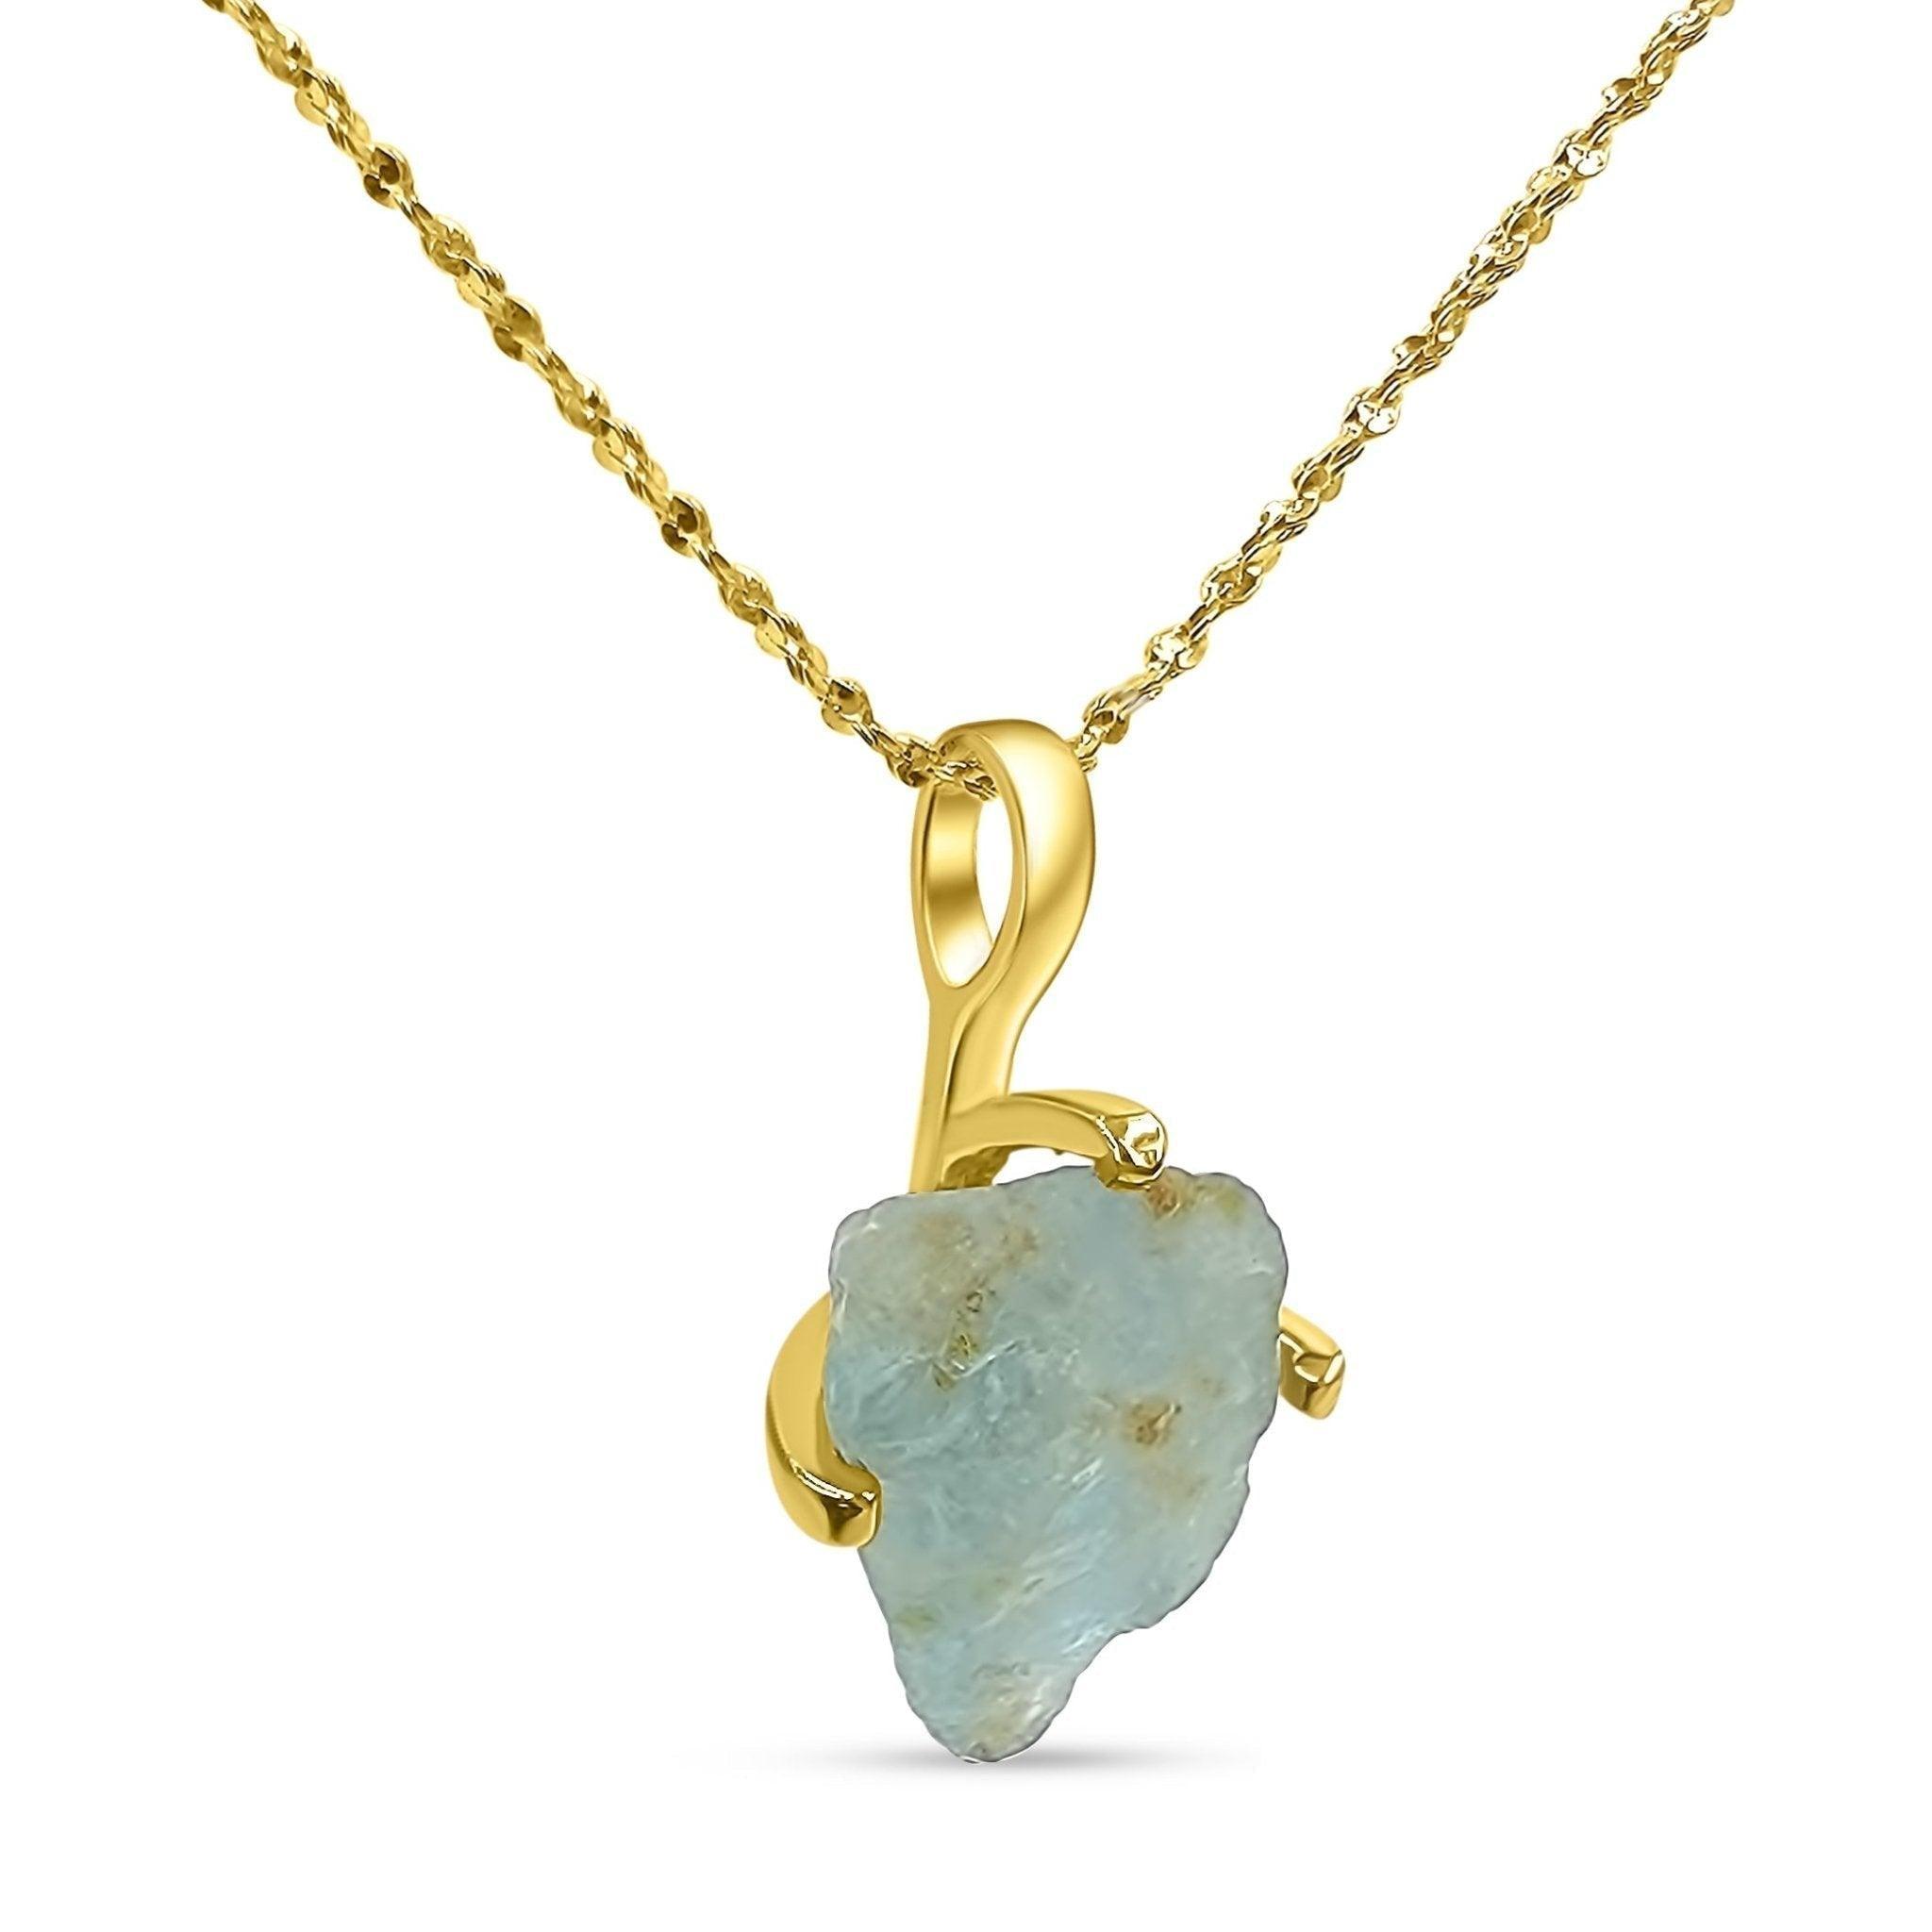 Raw Aquamarine Necklace - The Cool Store Gallery